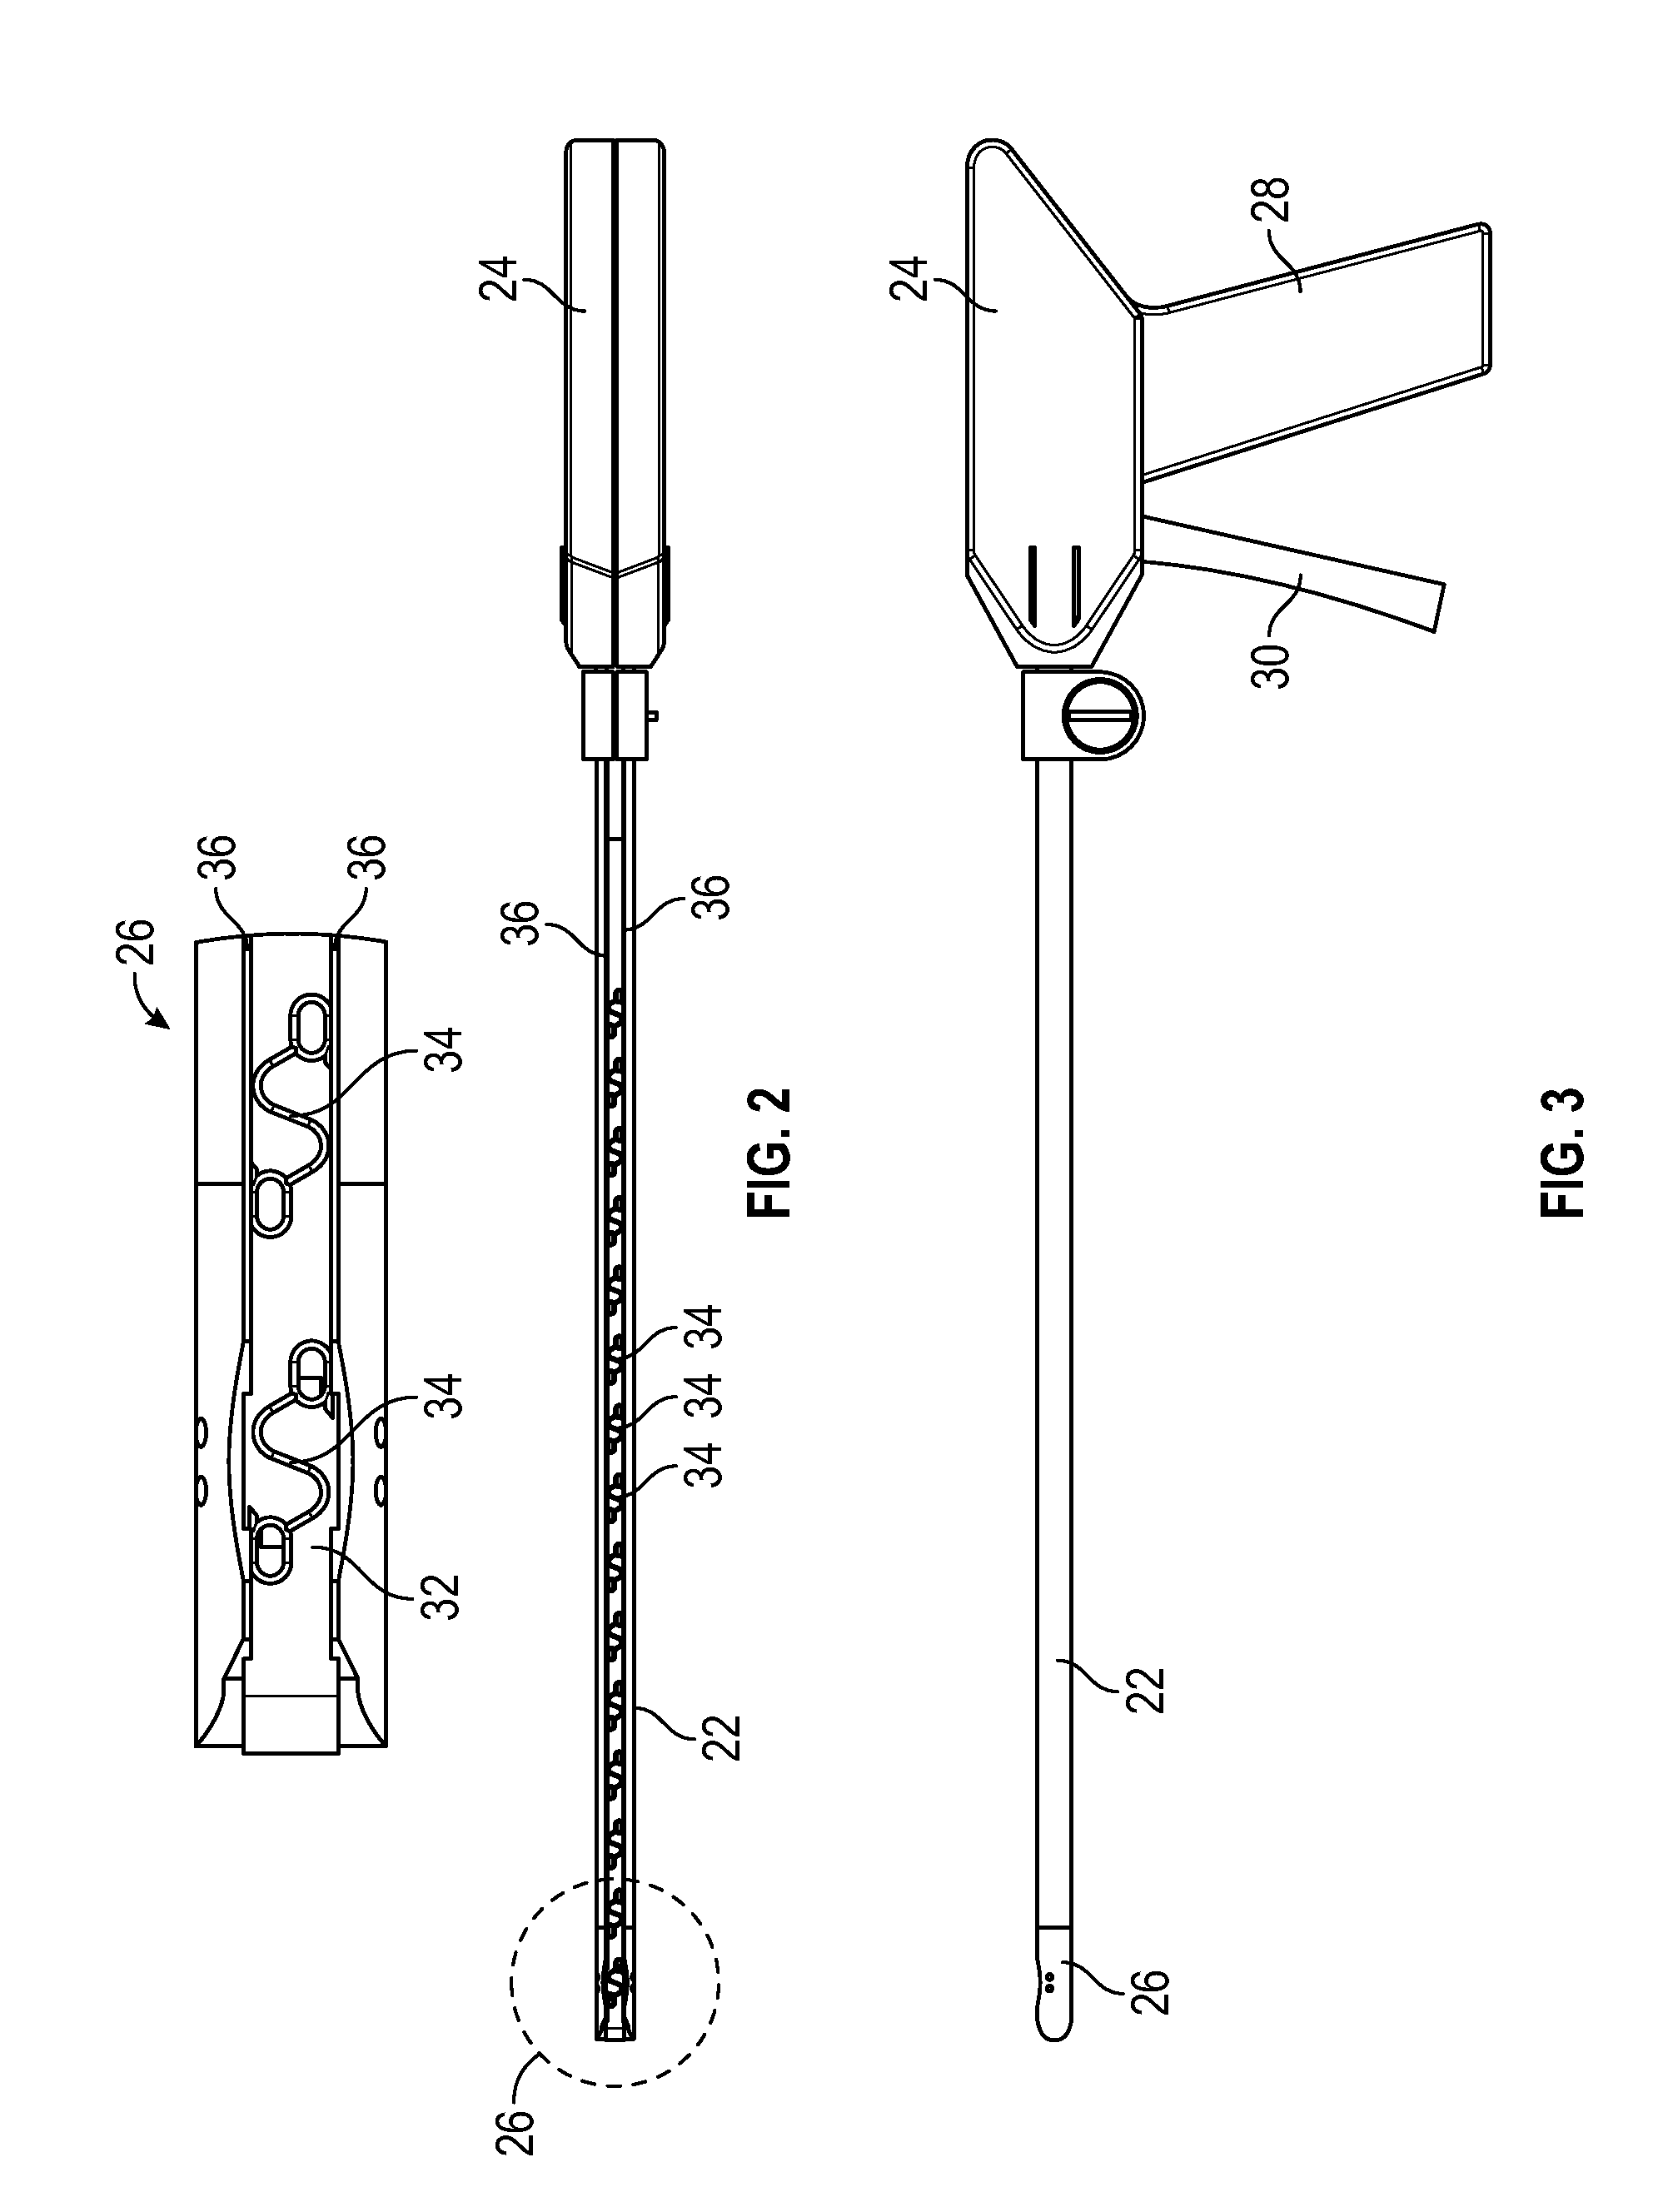 Medical fastening device